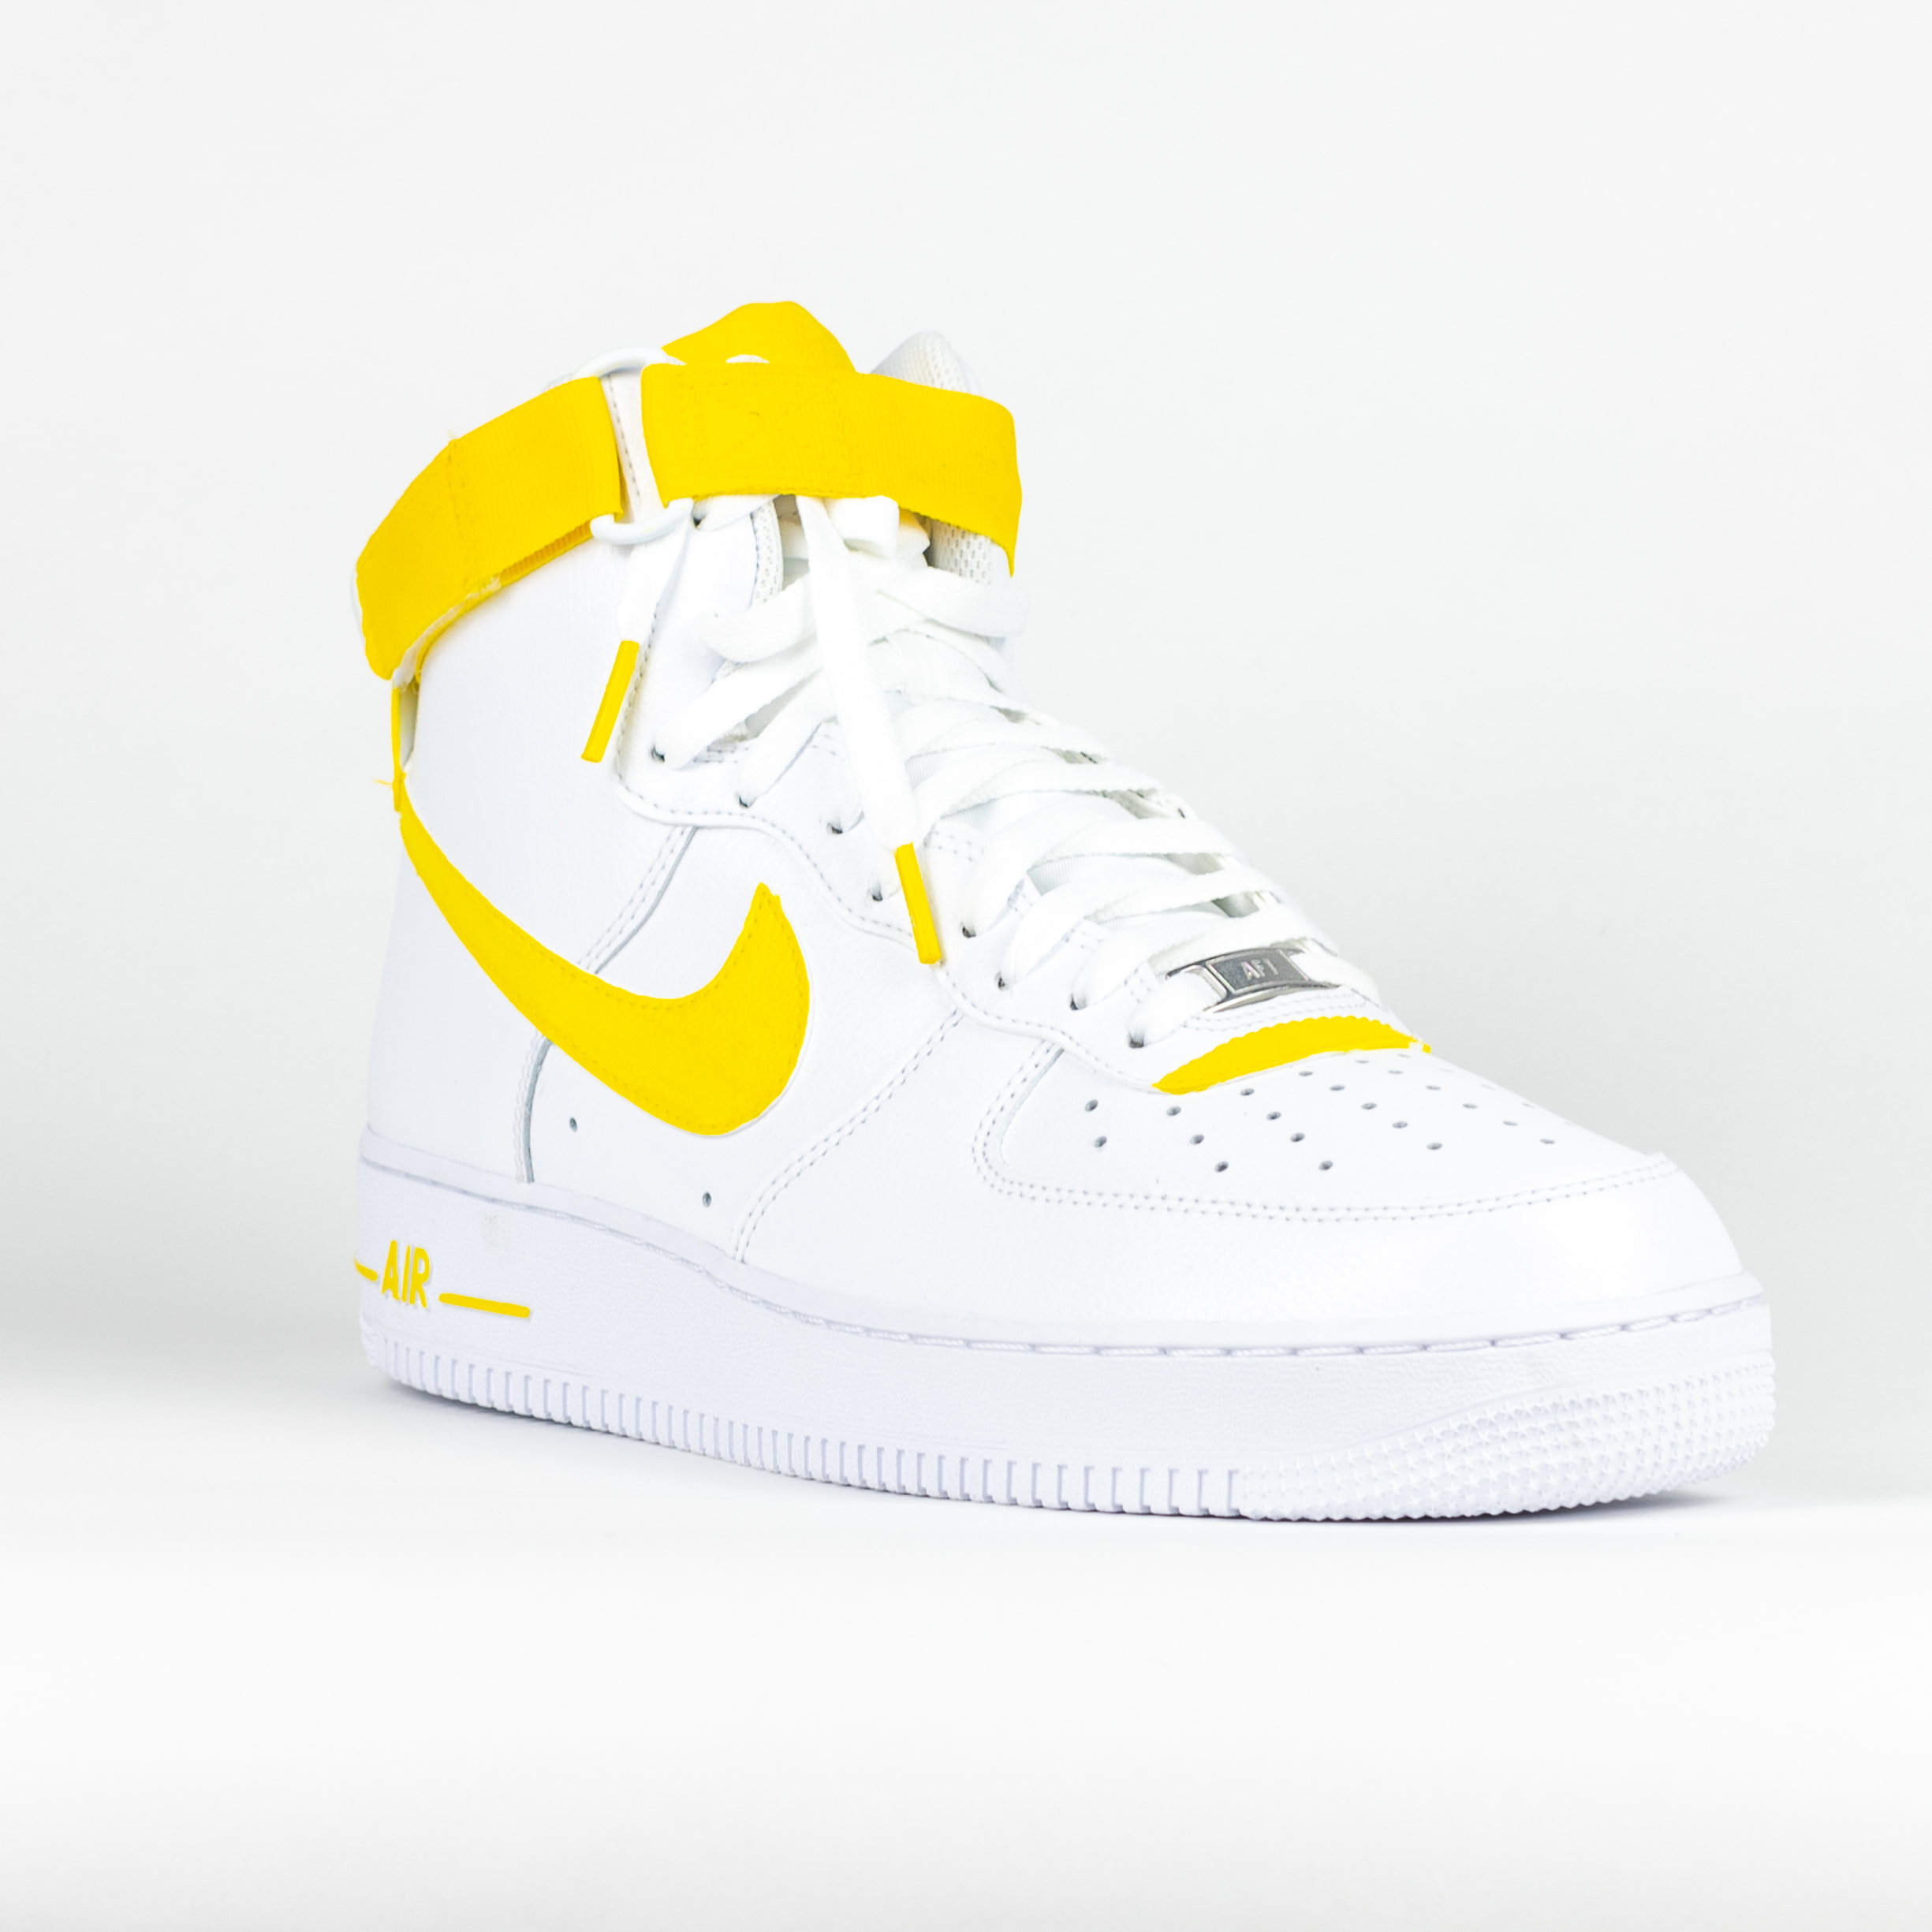 white and yellow high top air force ones